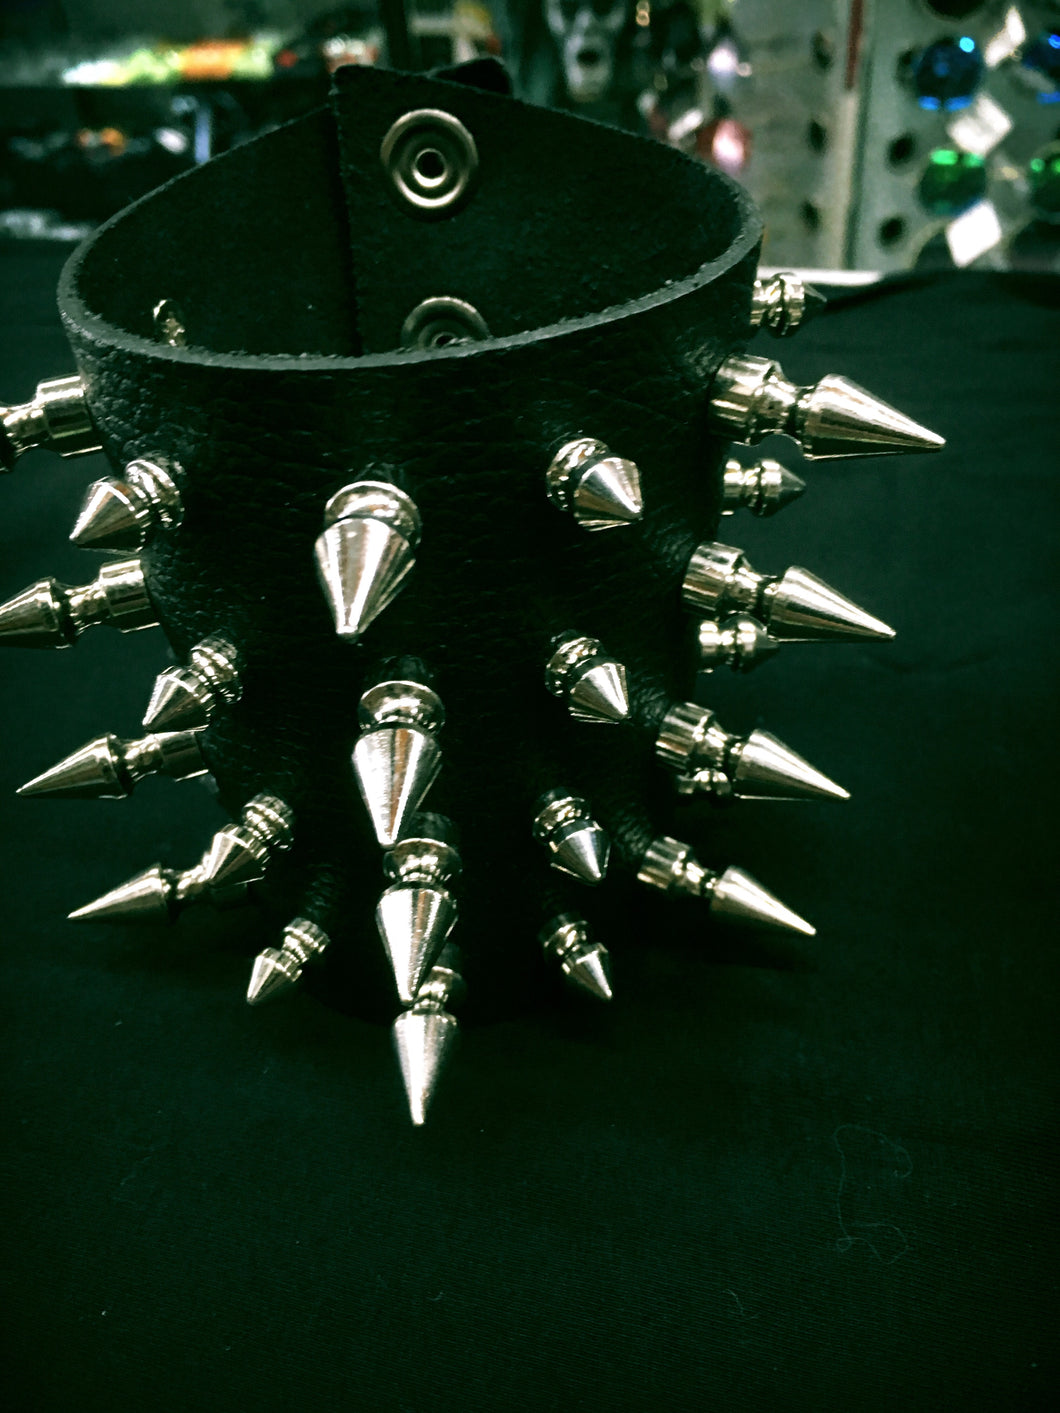 black leather gauntlet bracelet with four rows of different sized silver spikes. shows snap closure